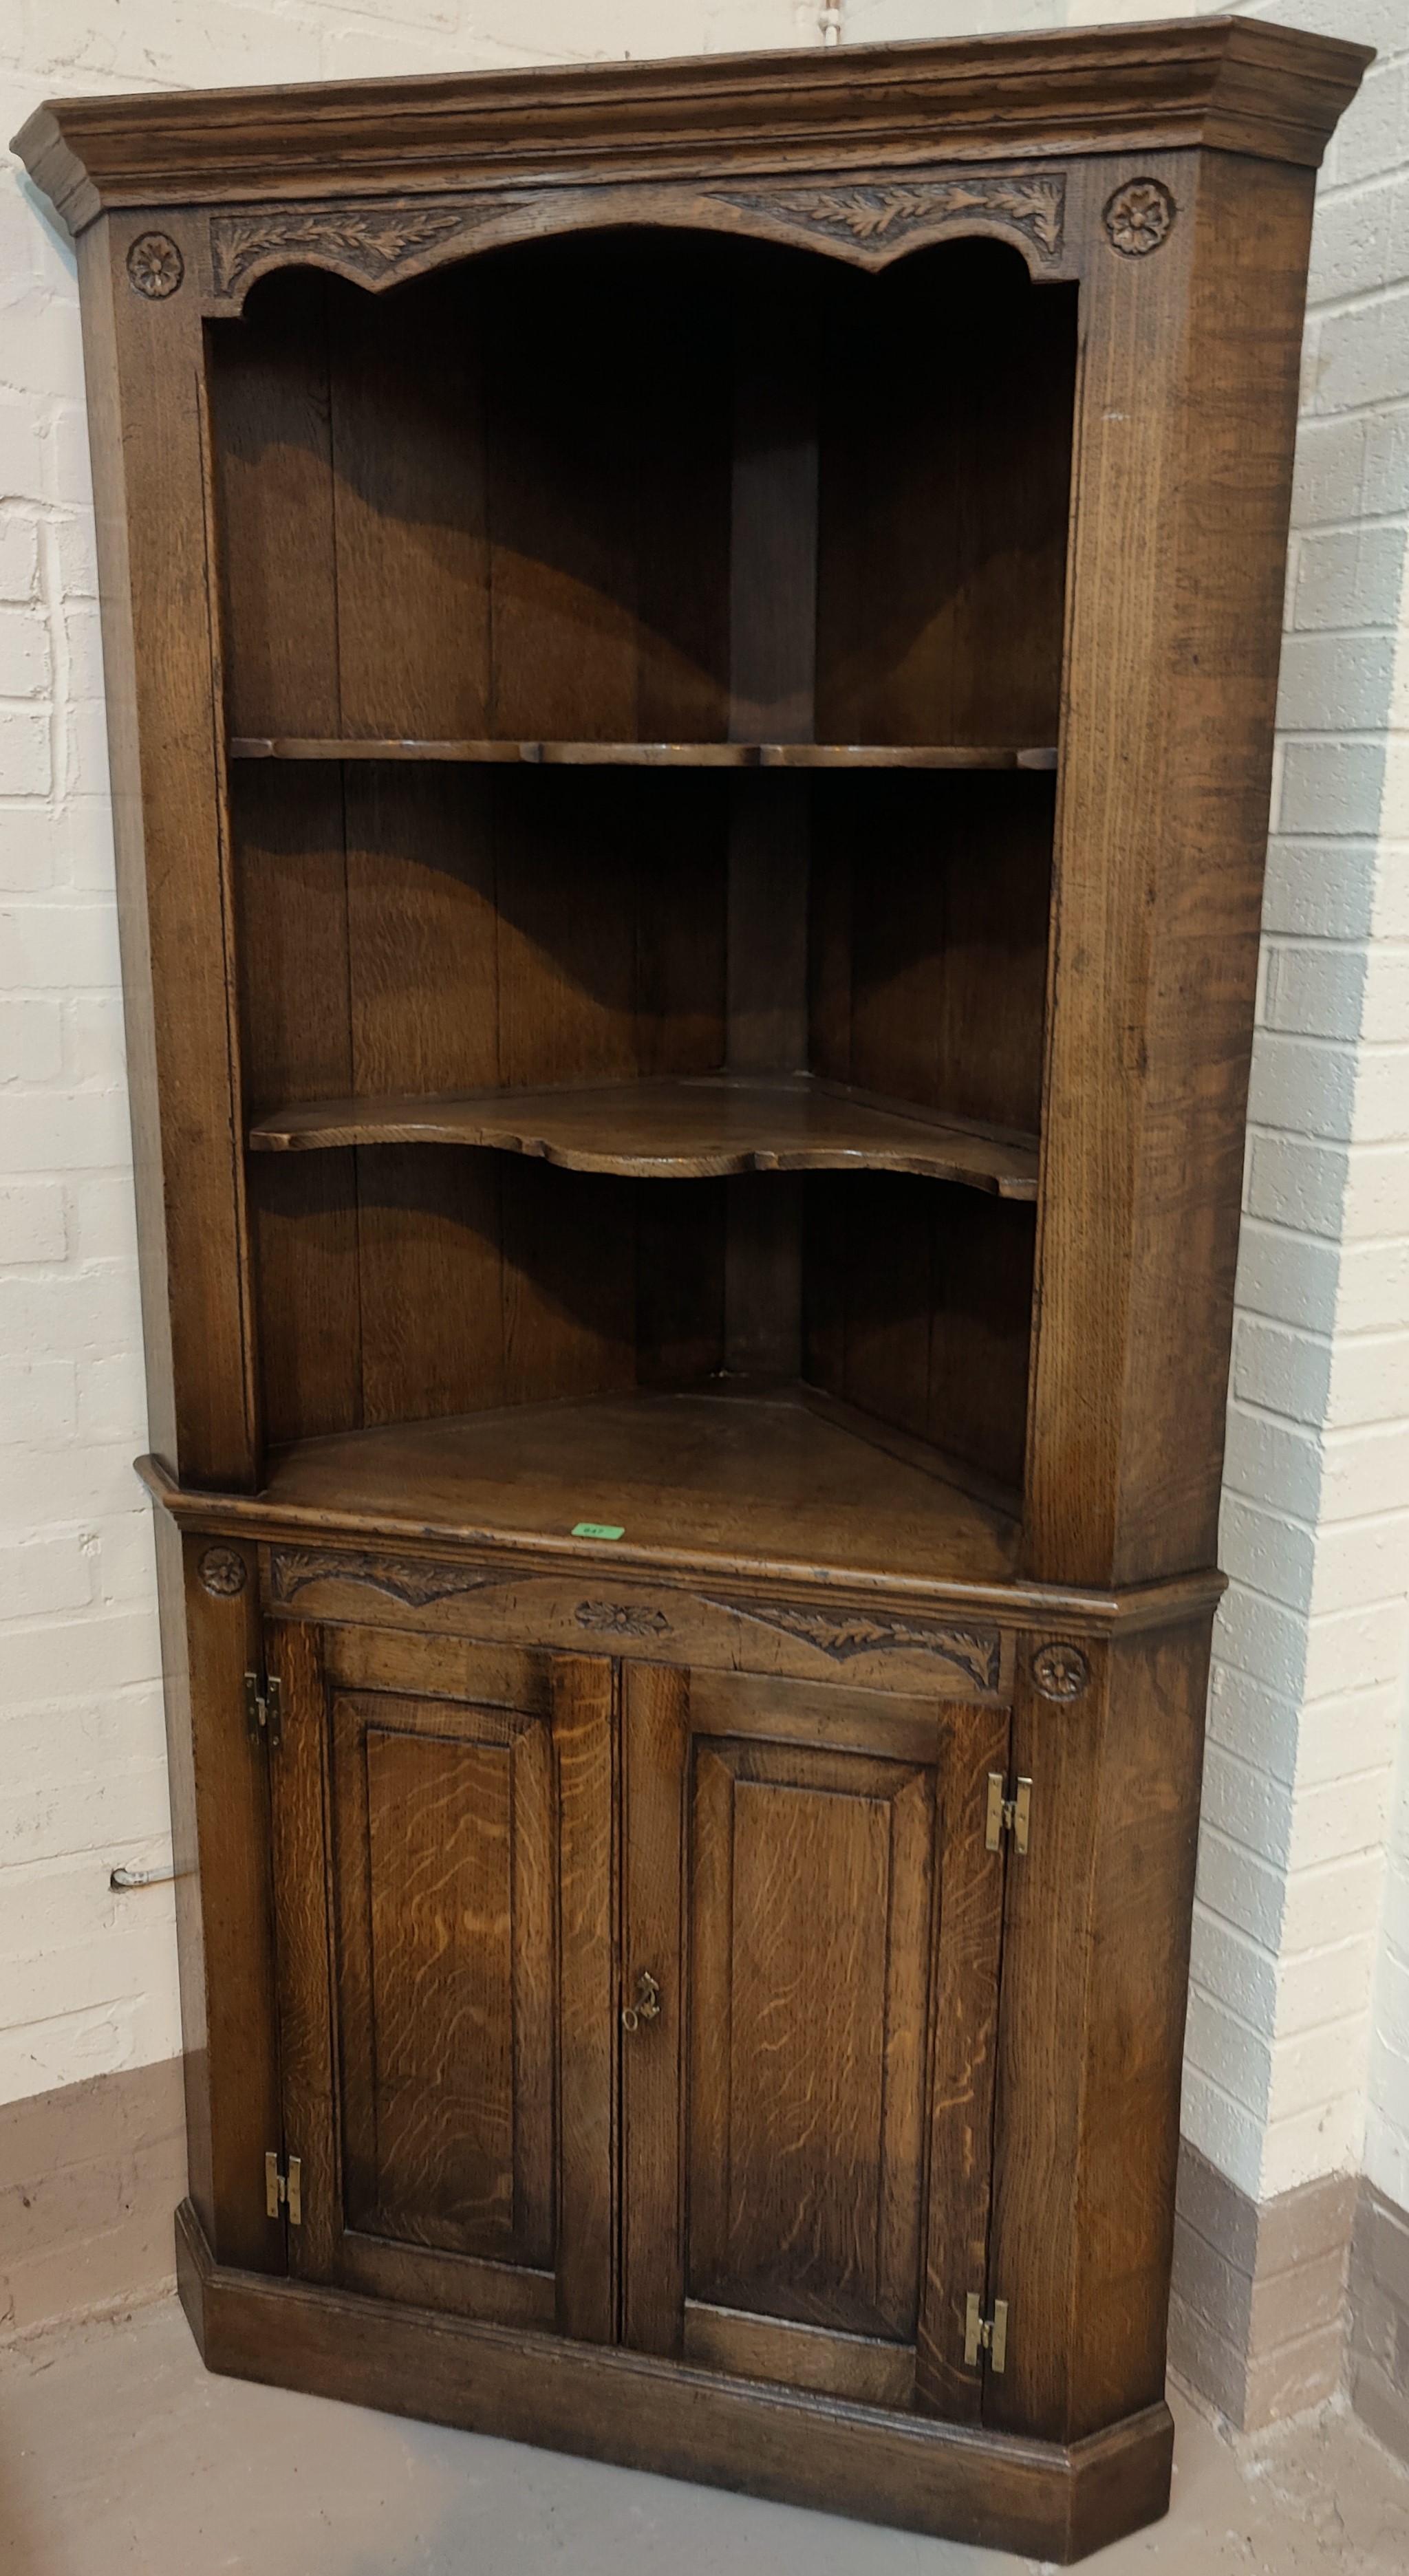 A 'Royal Oak' full height distressed oak corner cupboard with two shelves above and double